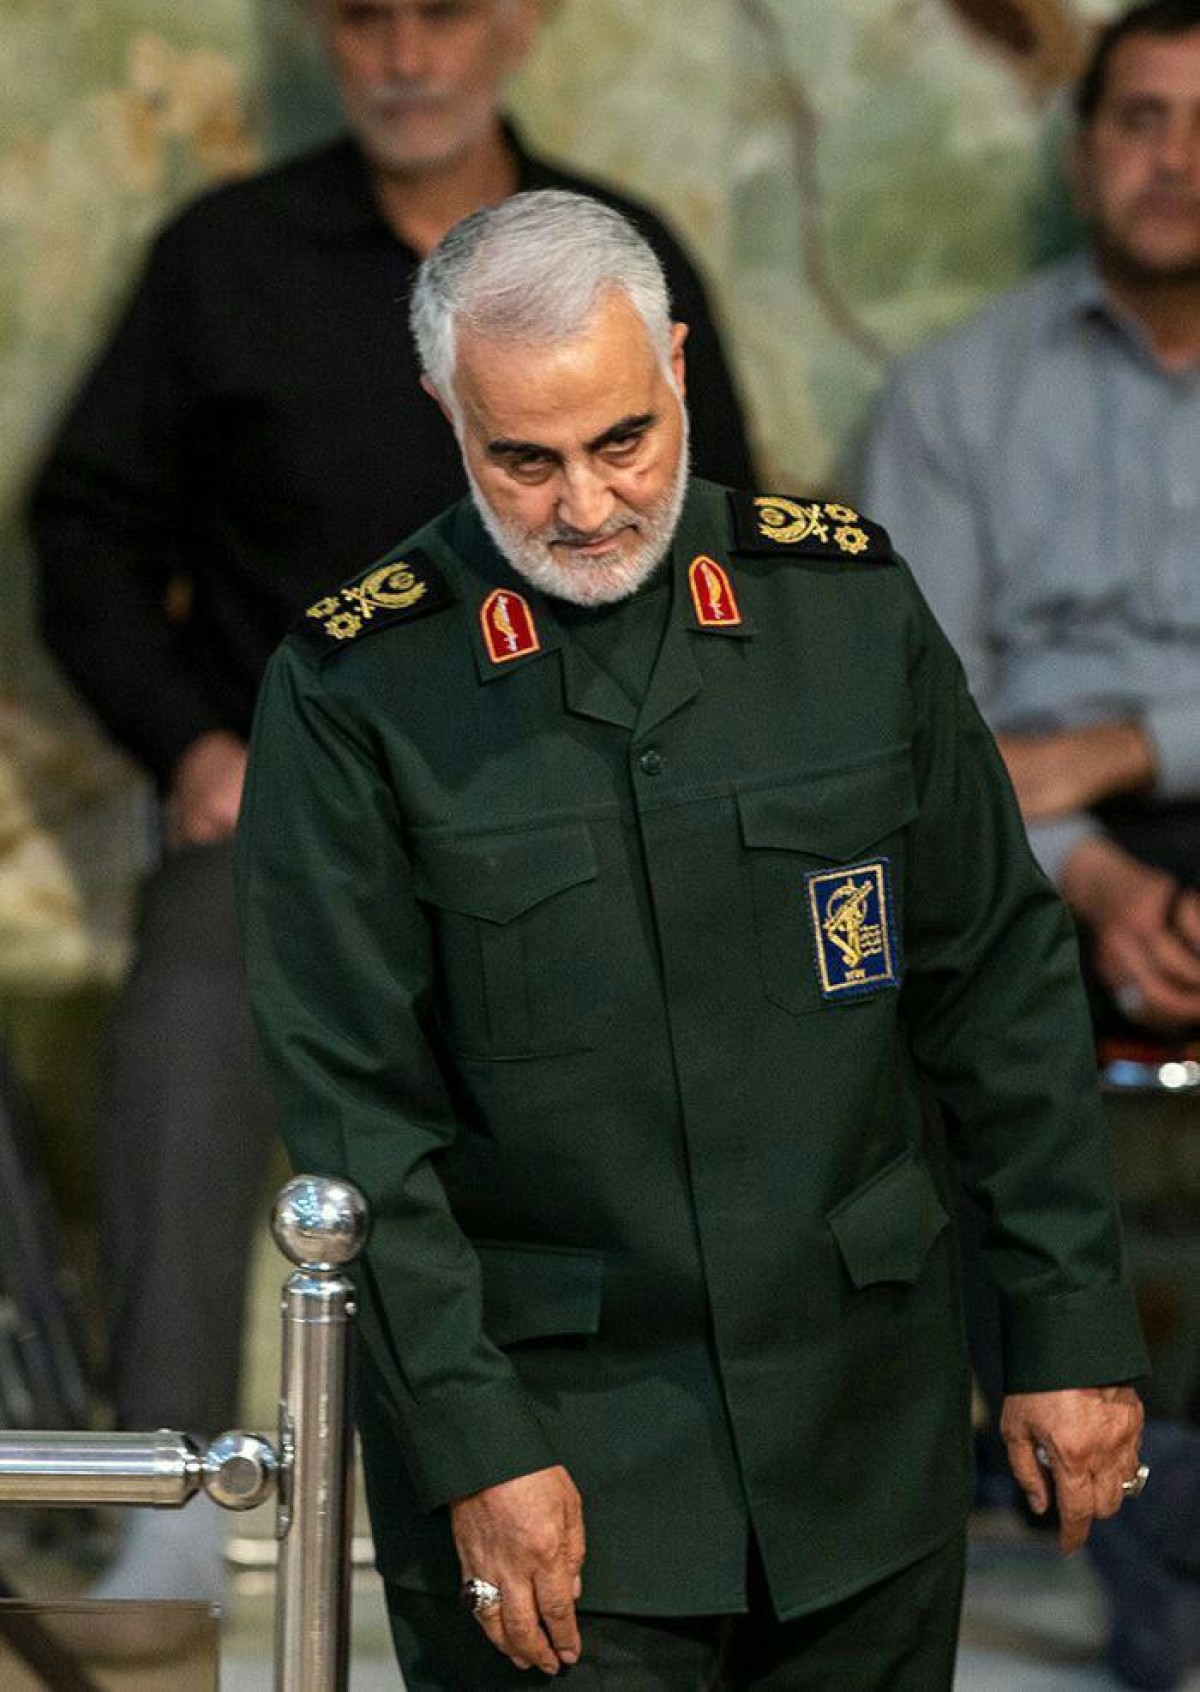 A beloved Iranian soldier: A brief look at General Qassem Soleimani’s life